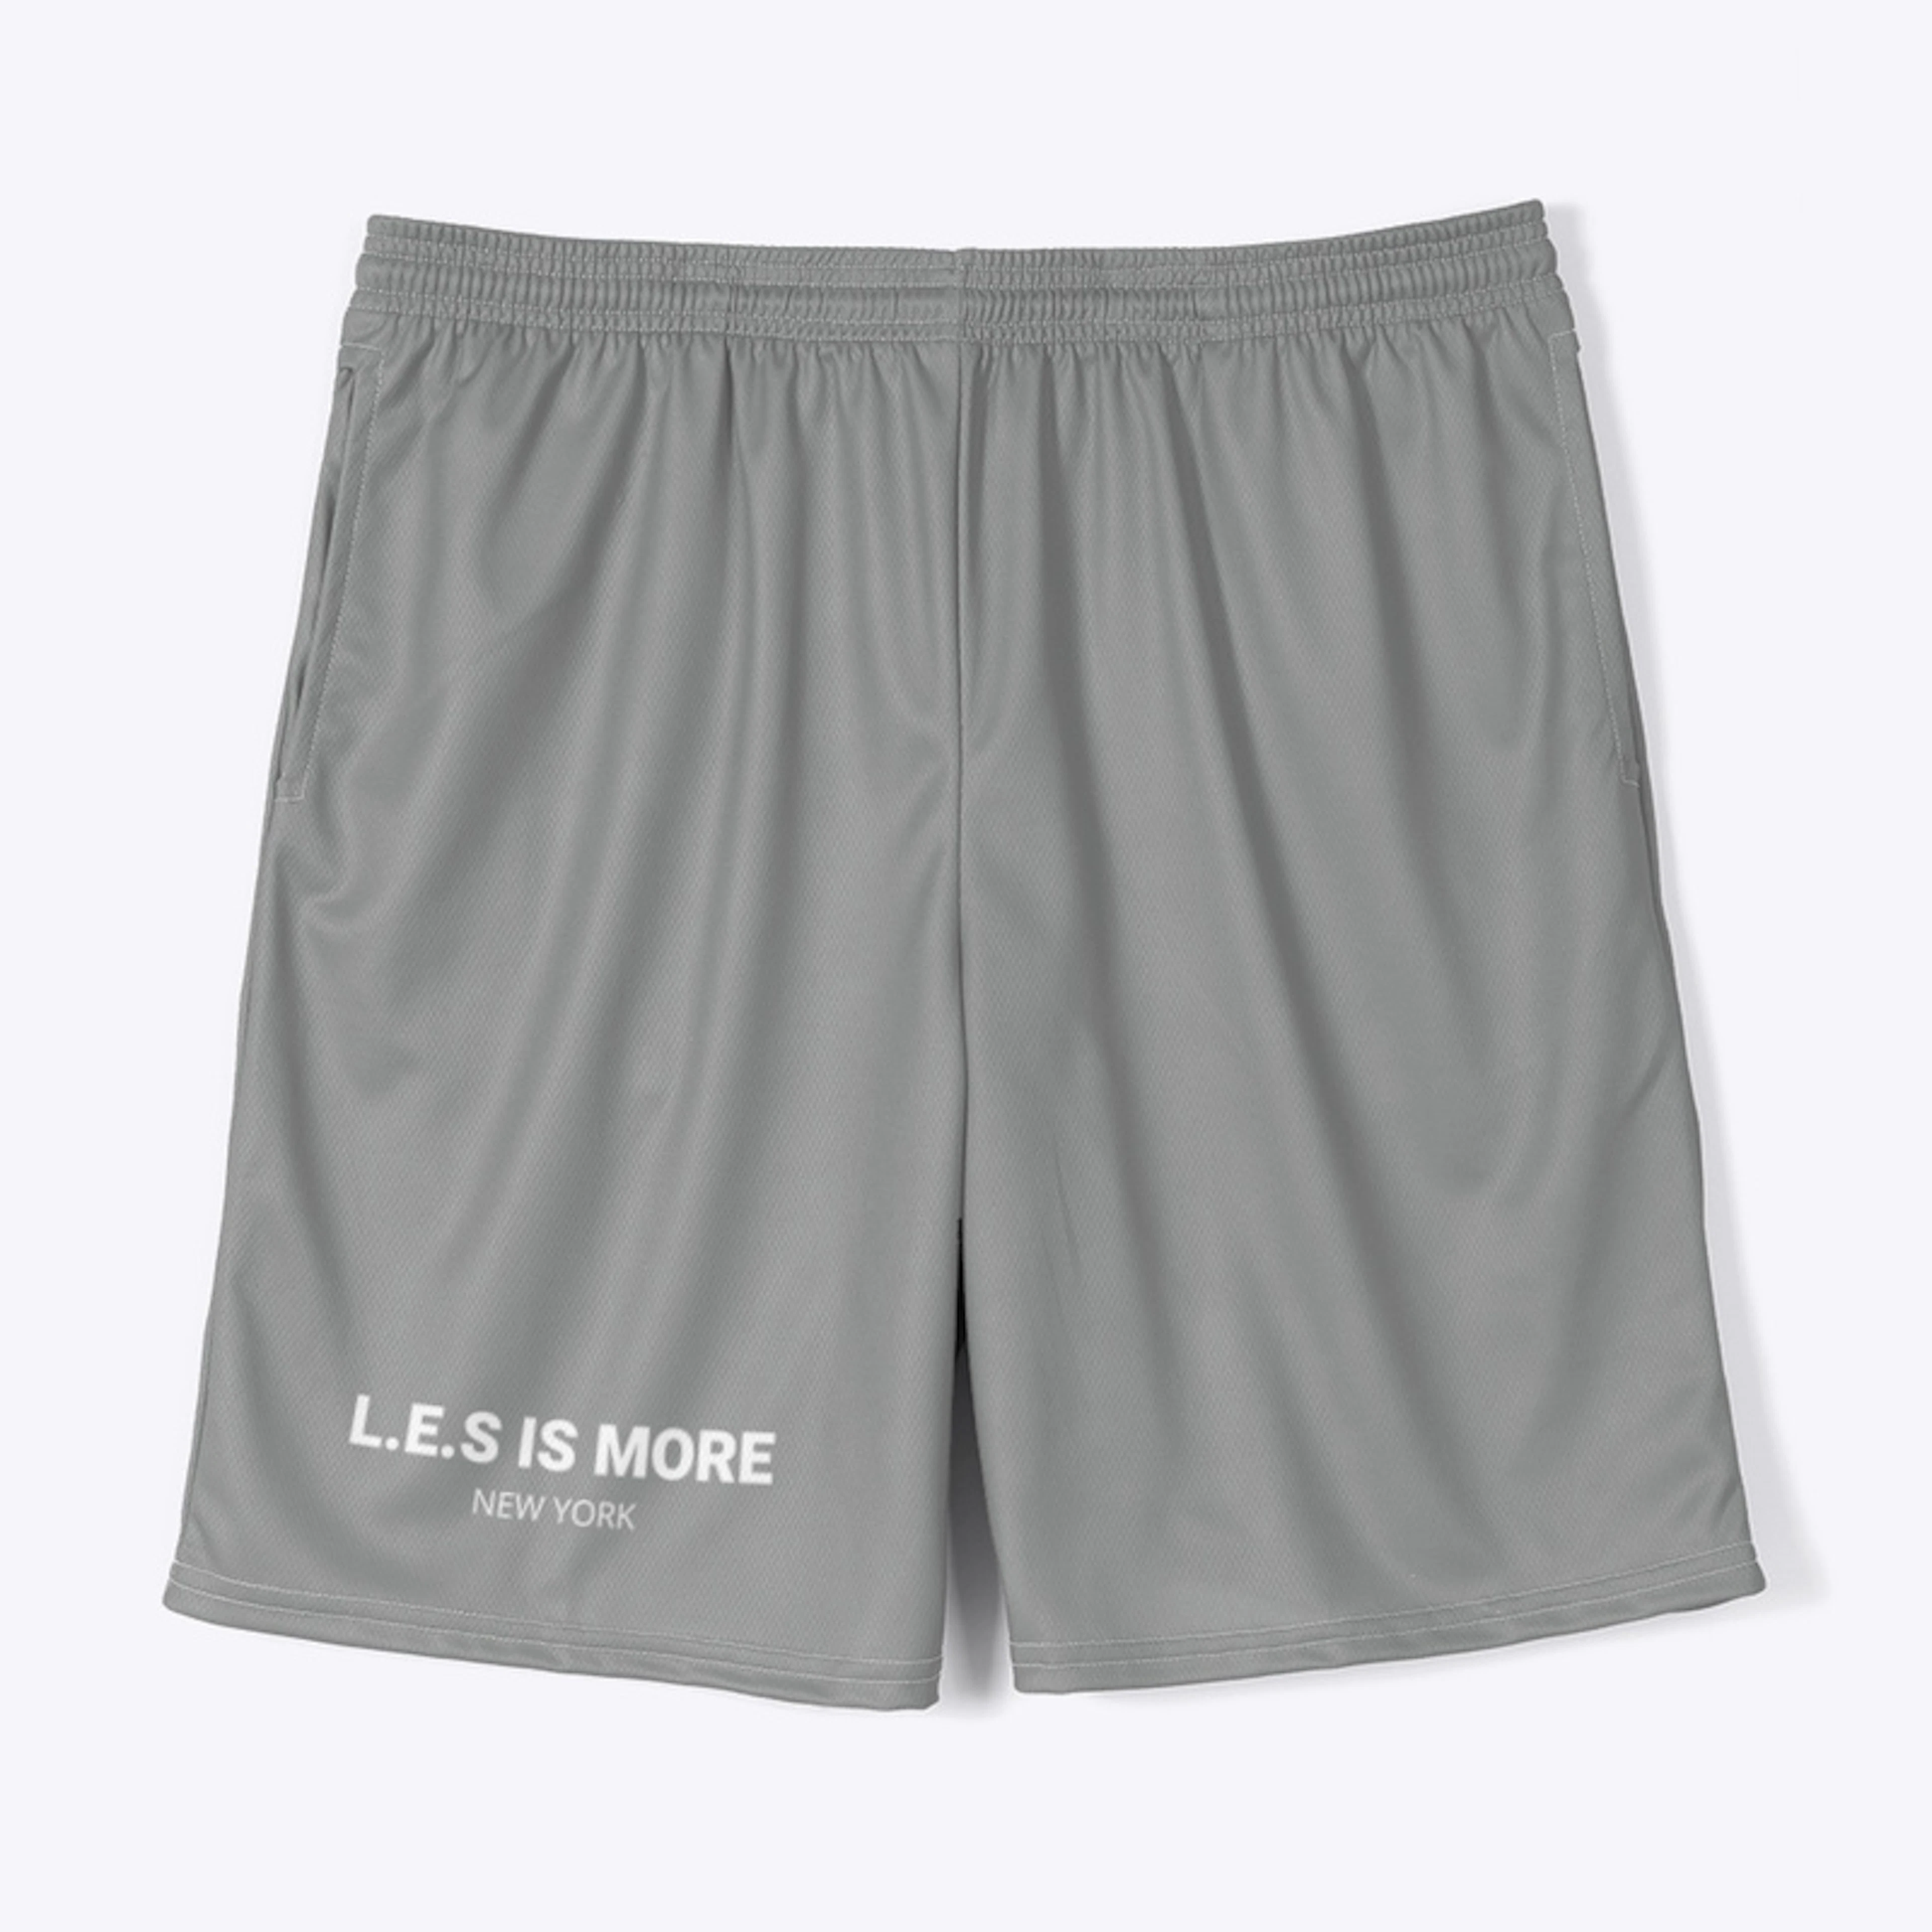 L.E.S IS MORE JERSEY SHORTS